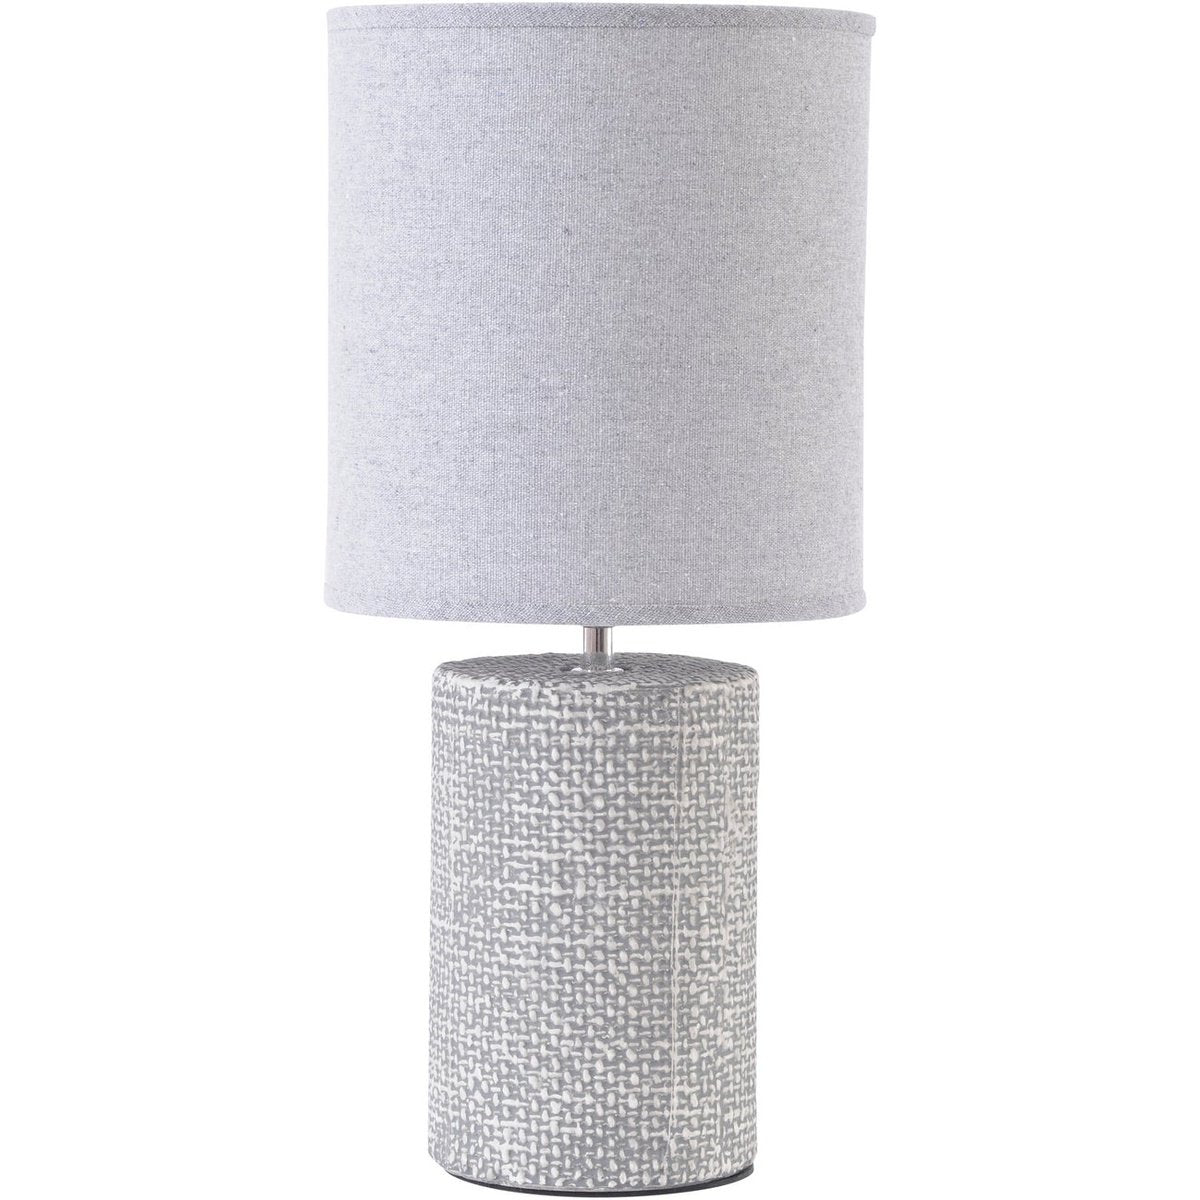 Grey Textured Porcelain Table Lamp With Shade  E14 40W